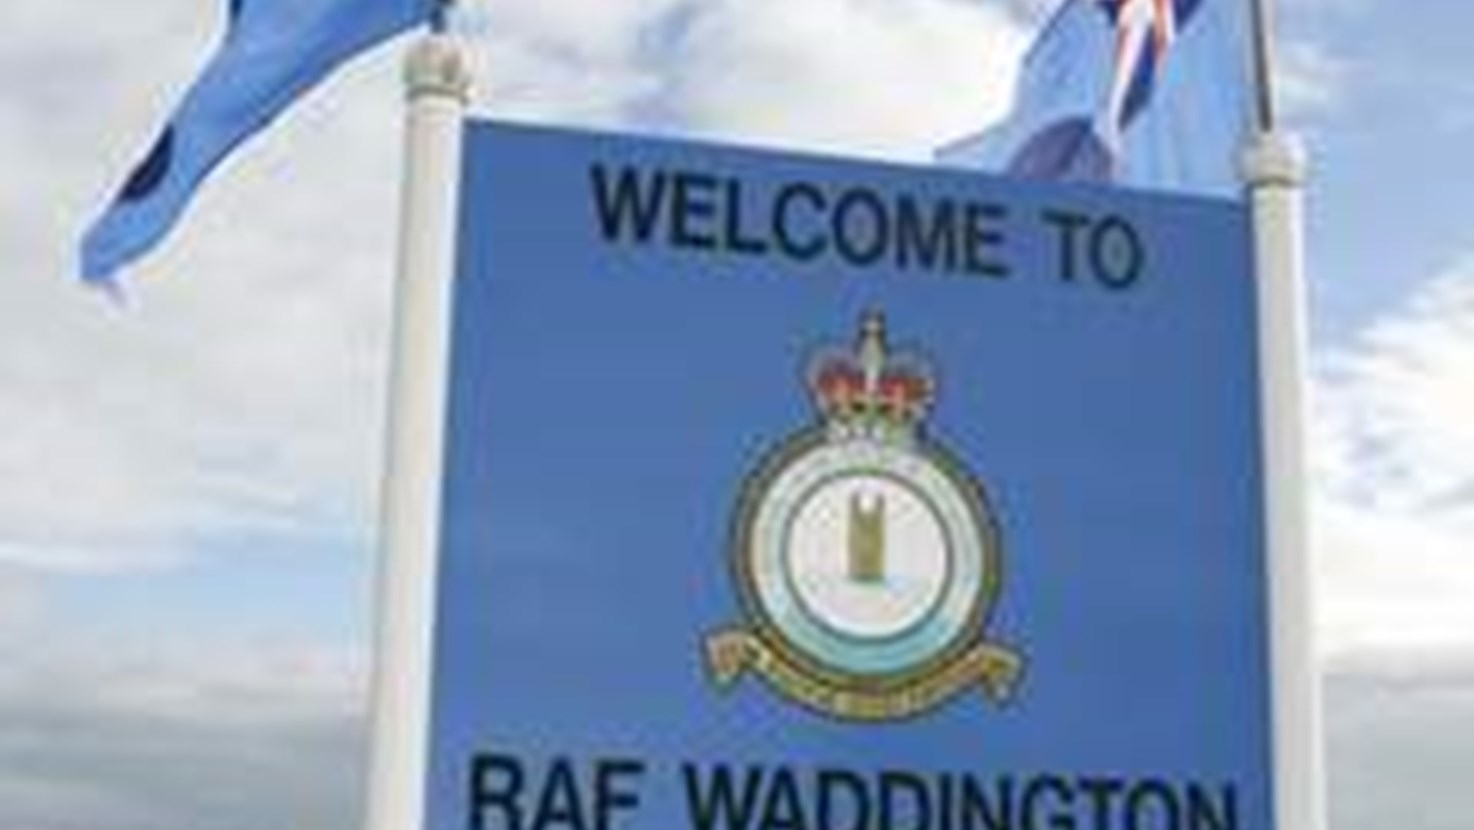 View all of the events and meetings that PCC Marc Jones attended or hosted at RAF Waddington in 2022